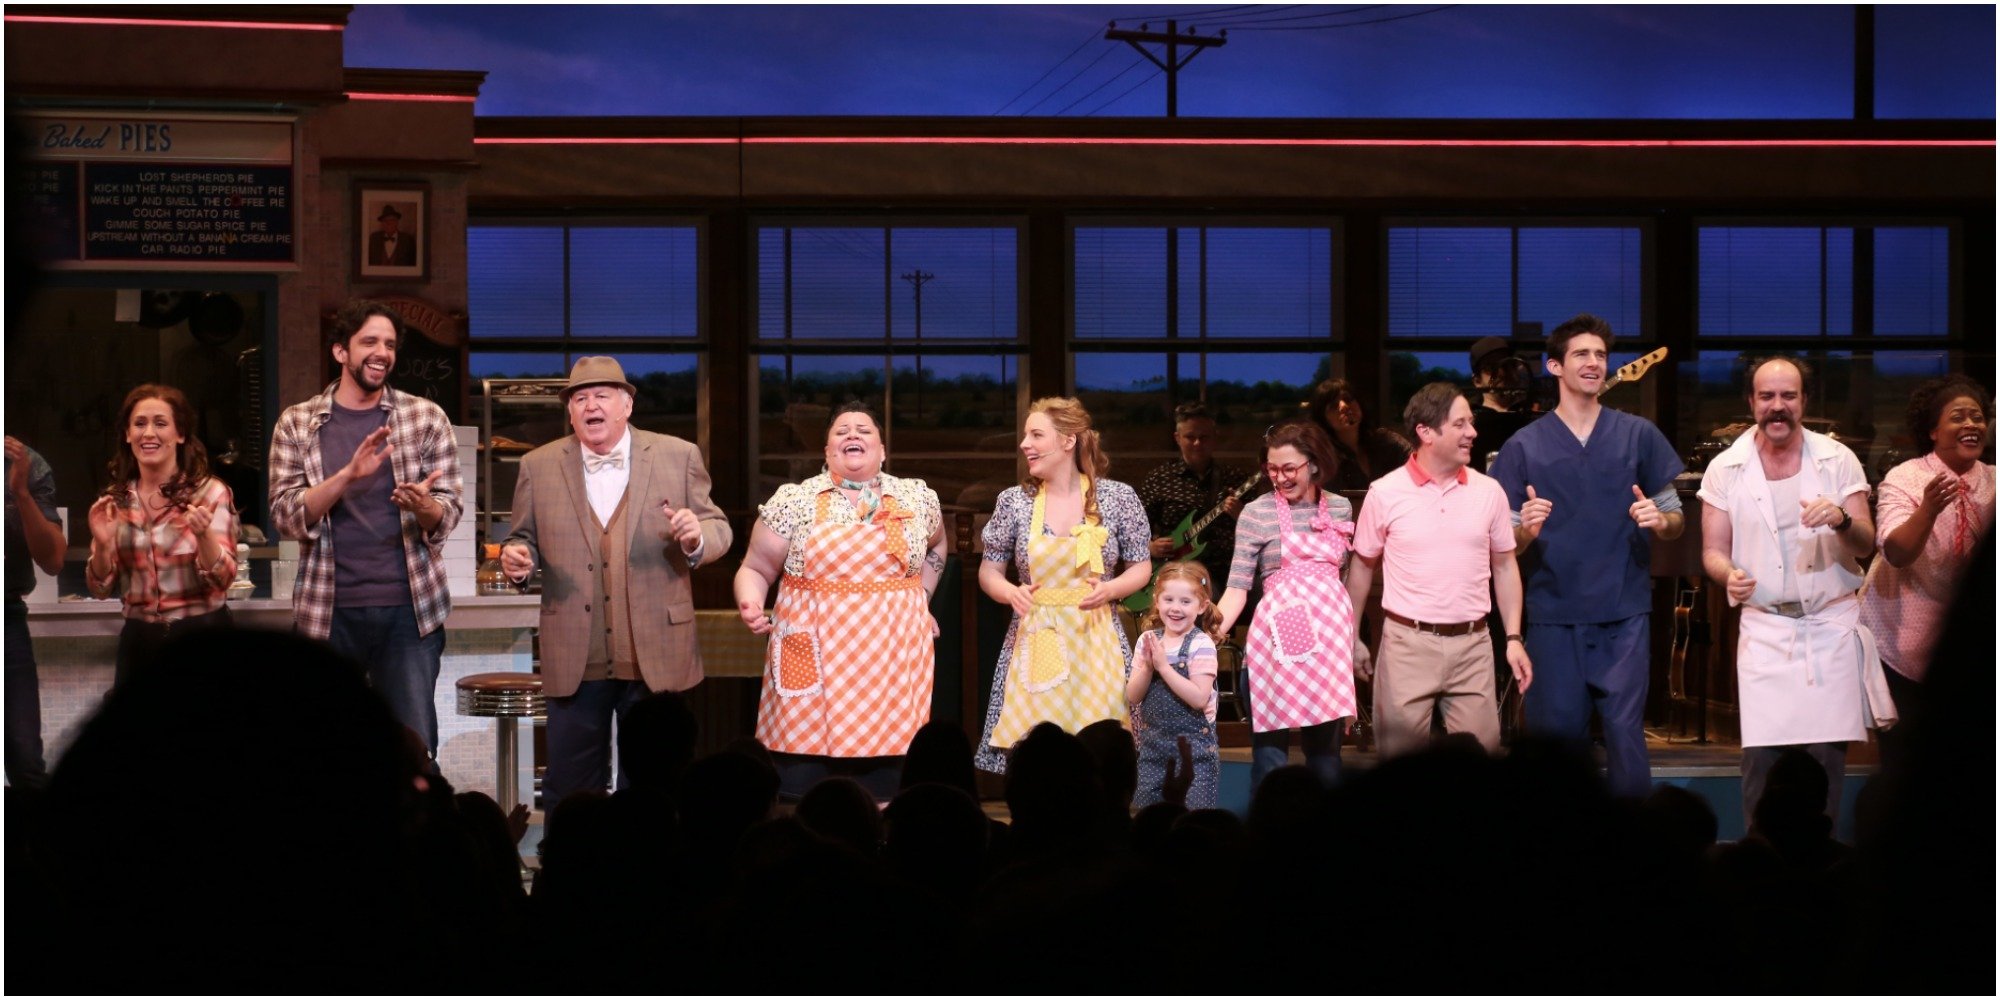 Nick Cordero was honored by the cast of "Waitress" with his own pie upon the musical's Broadway reopen.